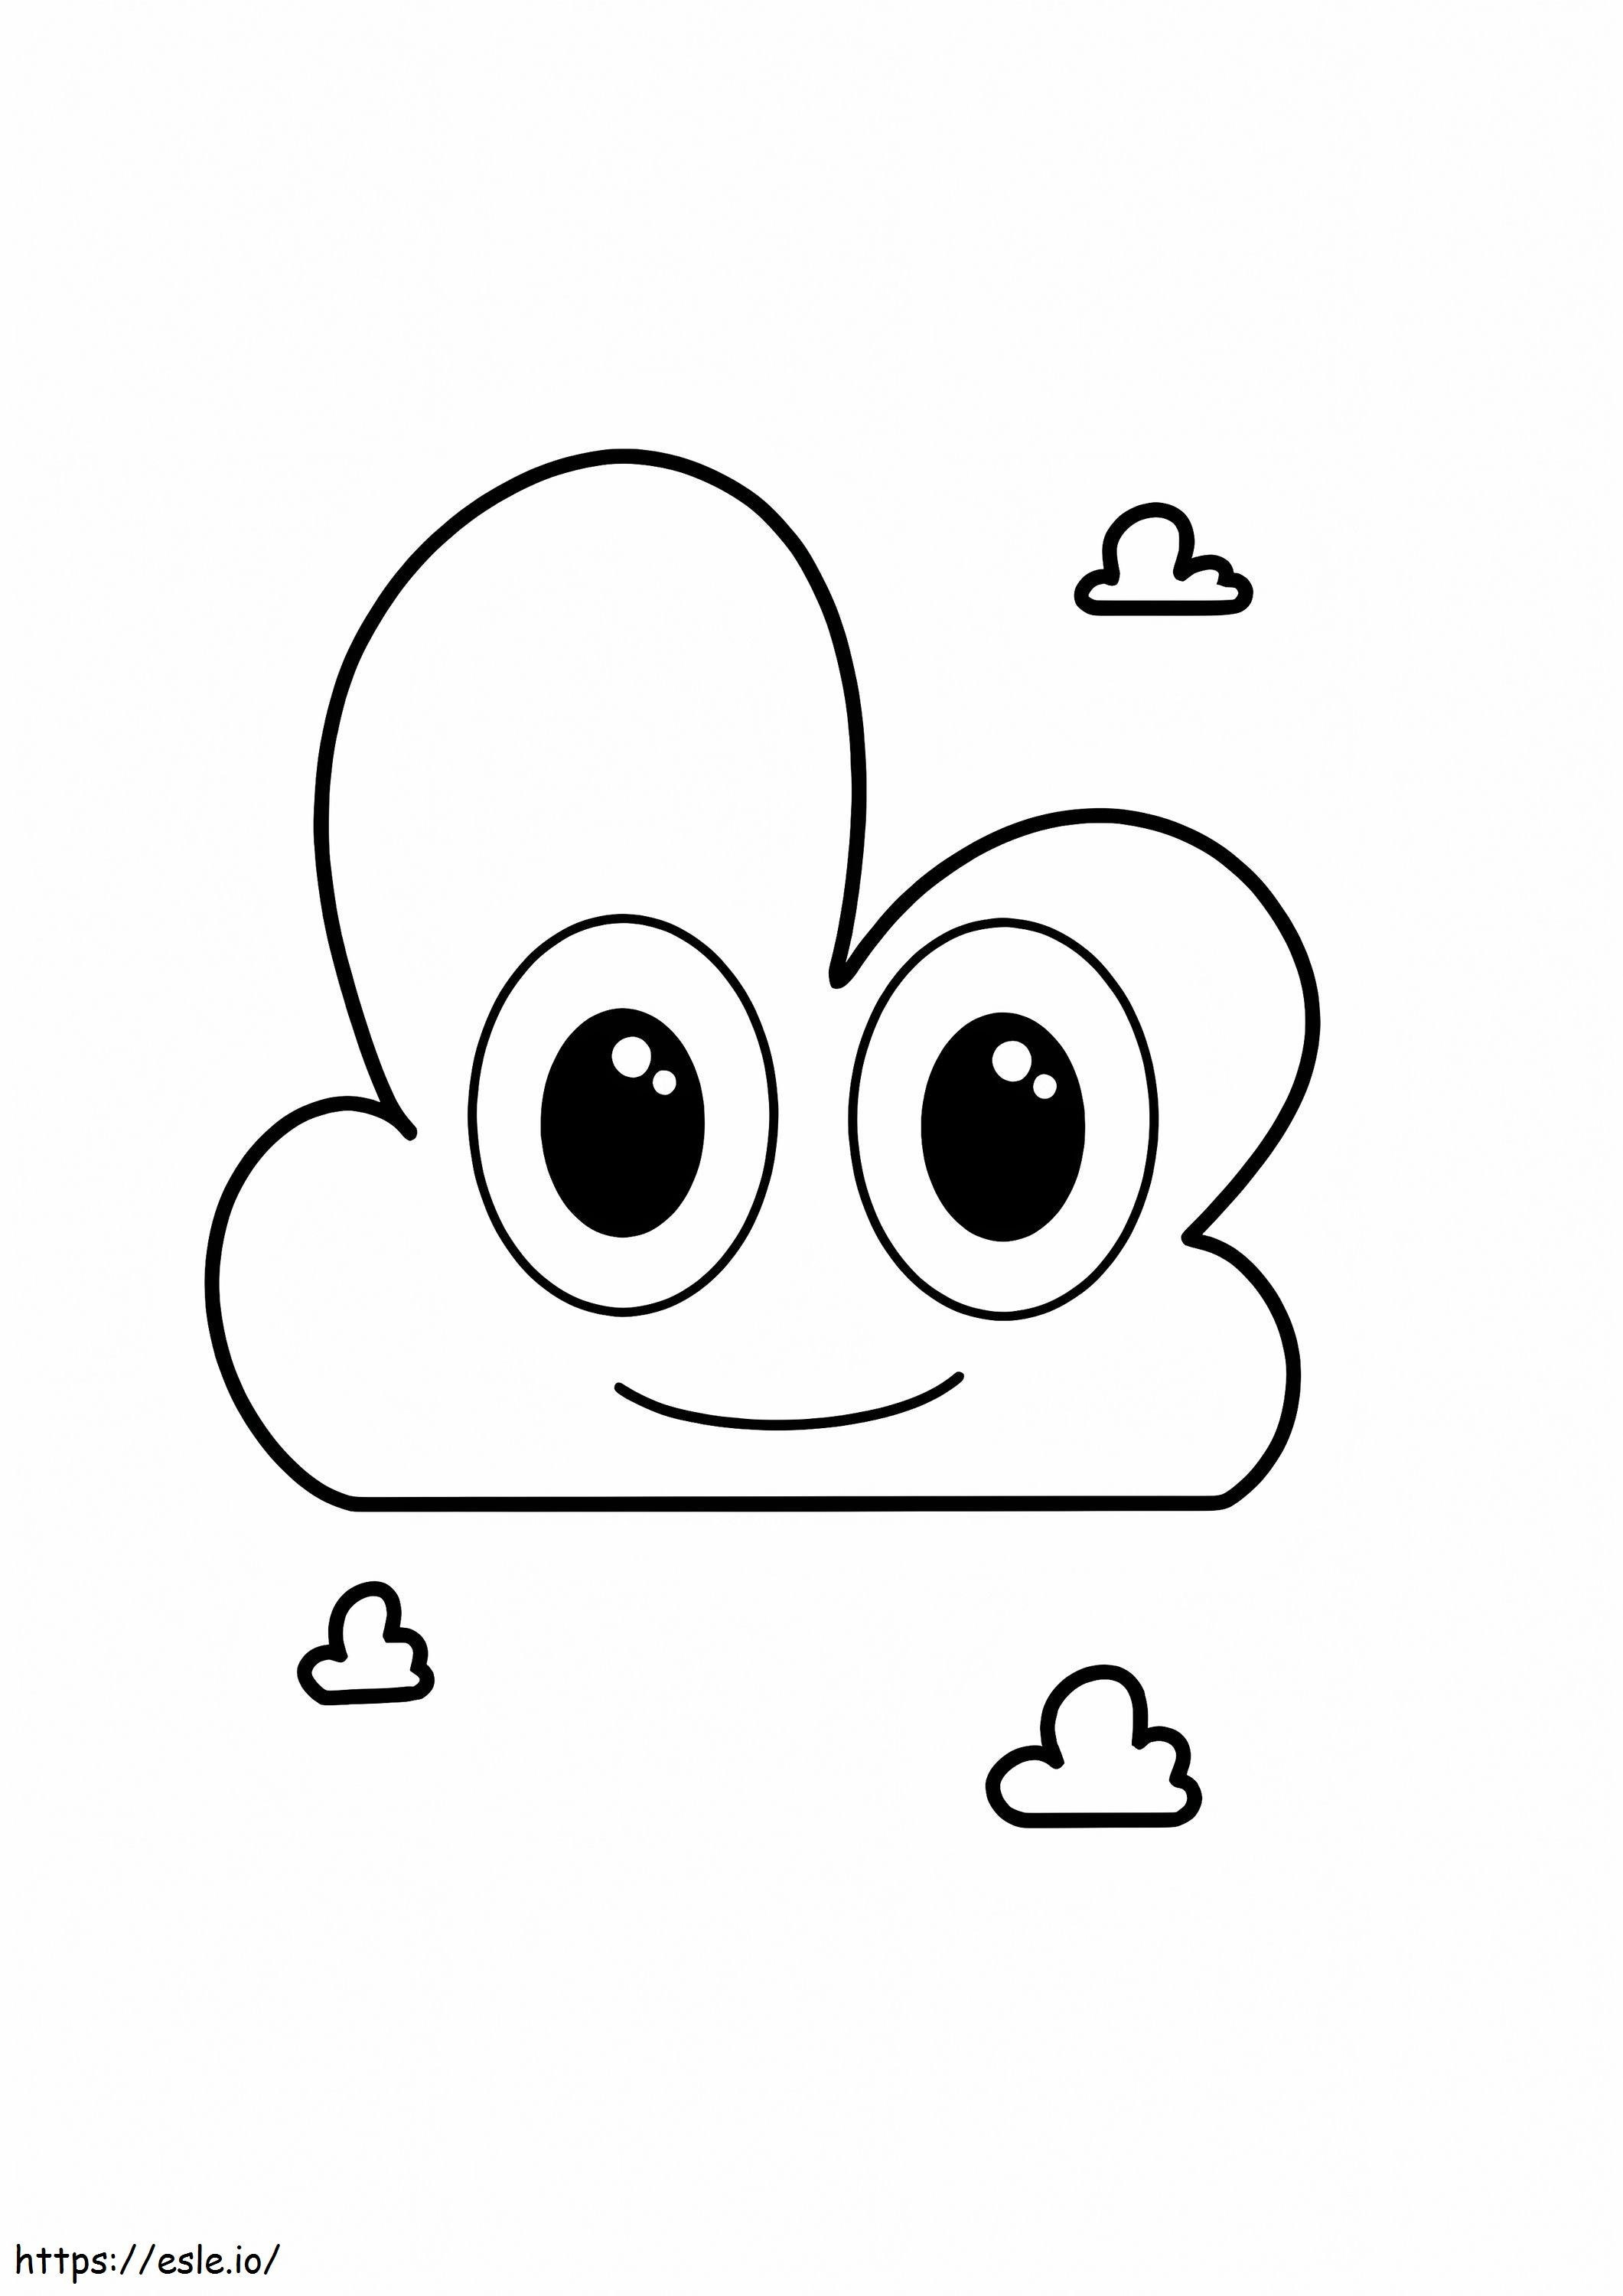 Lovely Cloud coloring page